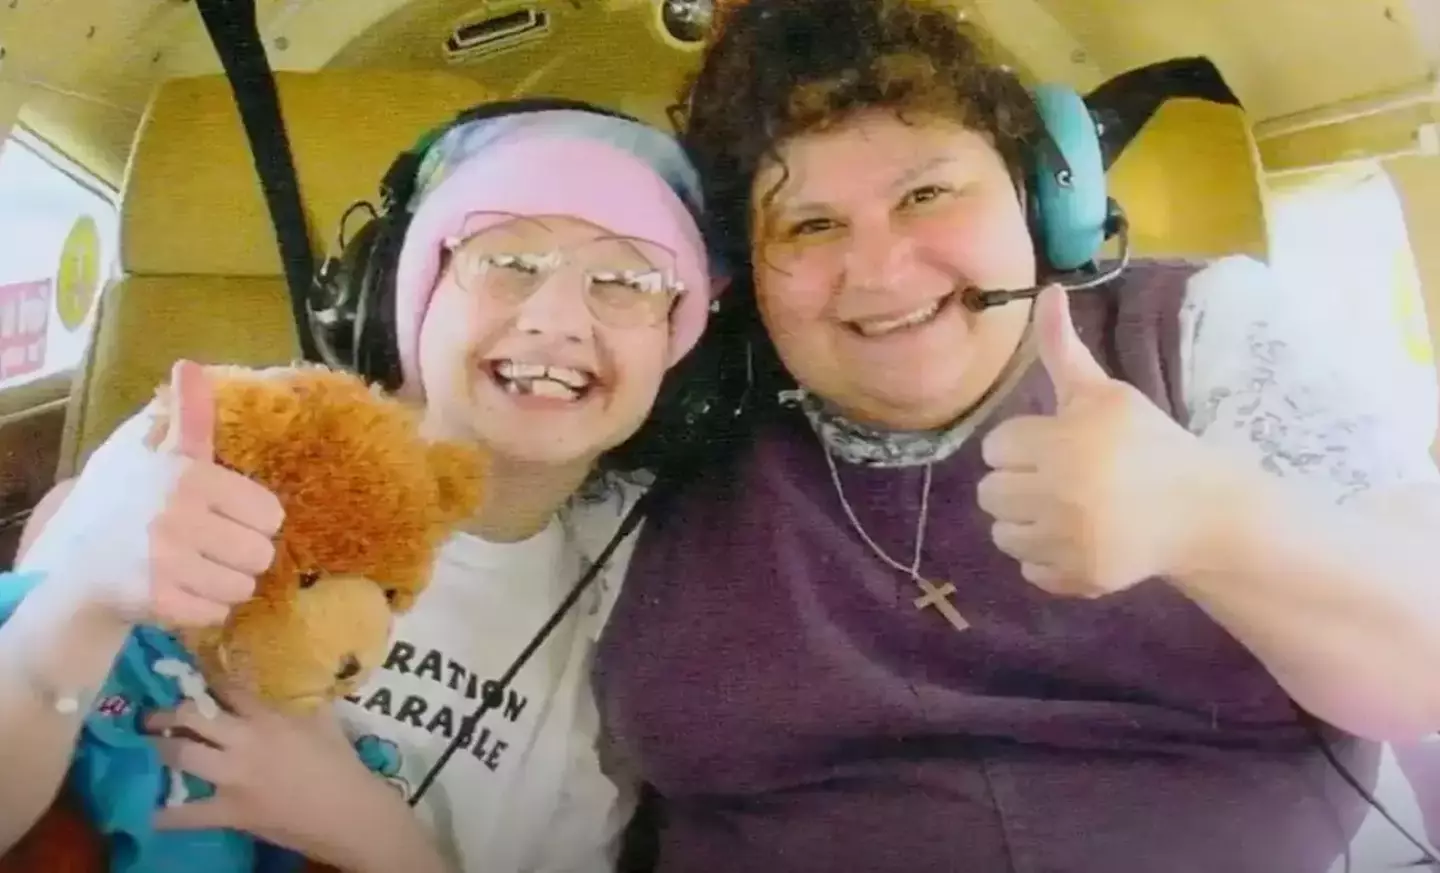 Gypsy Rose Blanchard served eight years of her prison sentence for her role in the murder of her mom, Clauddine 'Dee Dee' Blanchard.